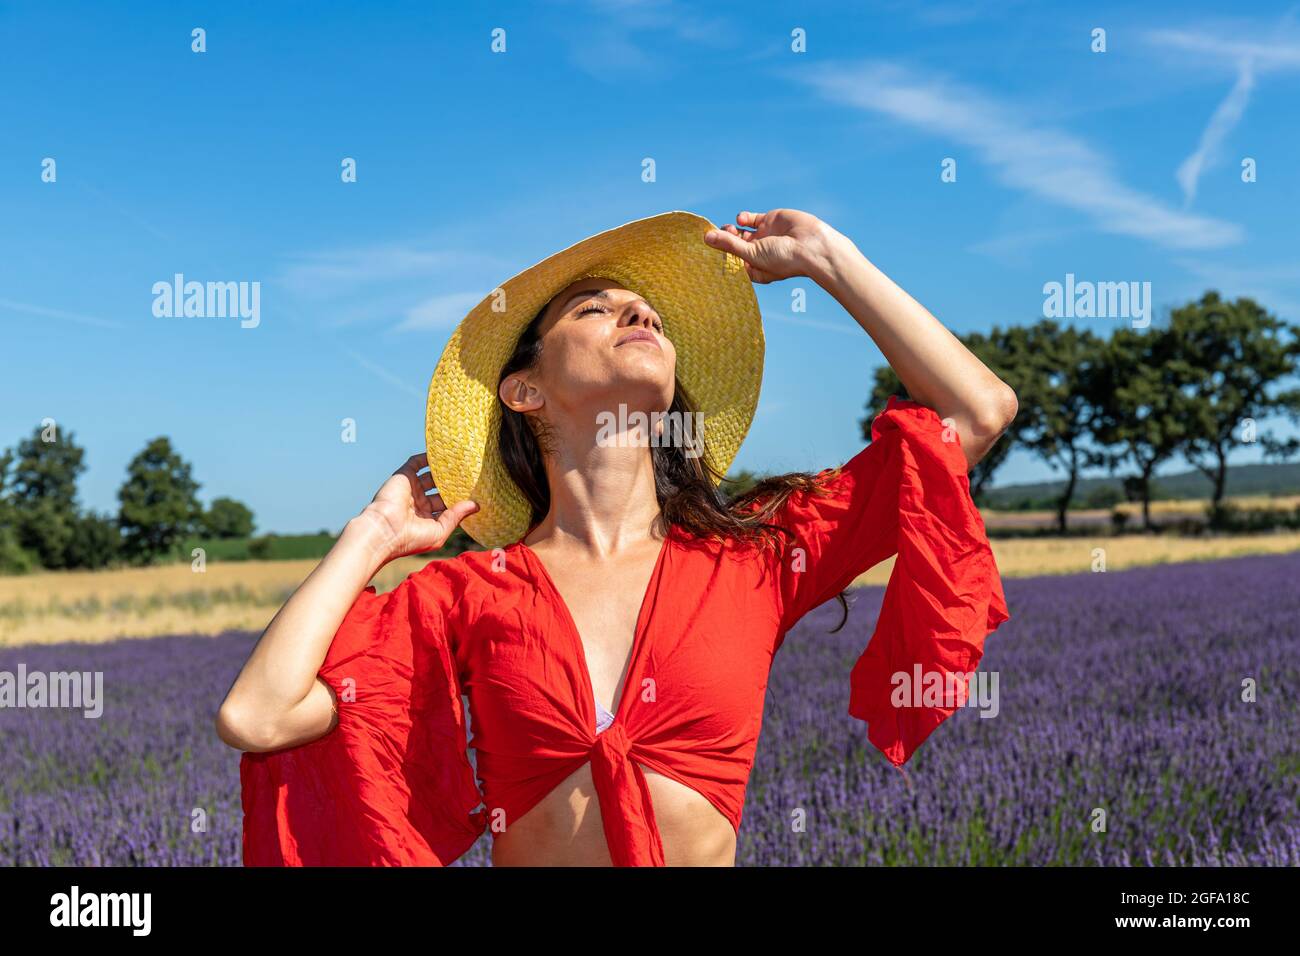 Portrait of a woman playing with her straw hat in a lavender field. She closes her eyes and smells the delicious scent of lavender flowers in the air. Stock Photo